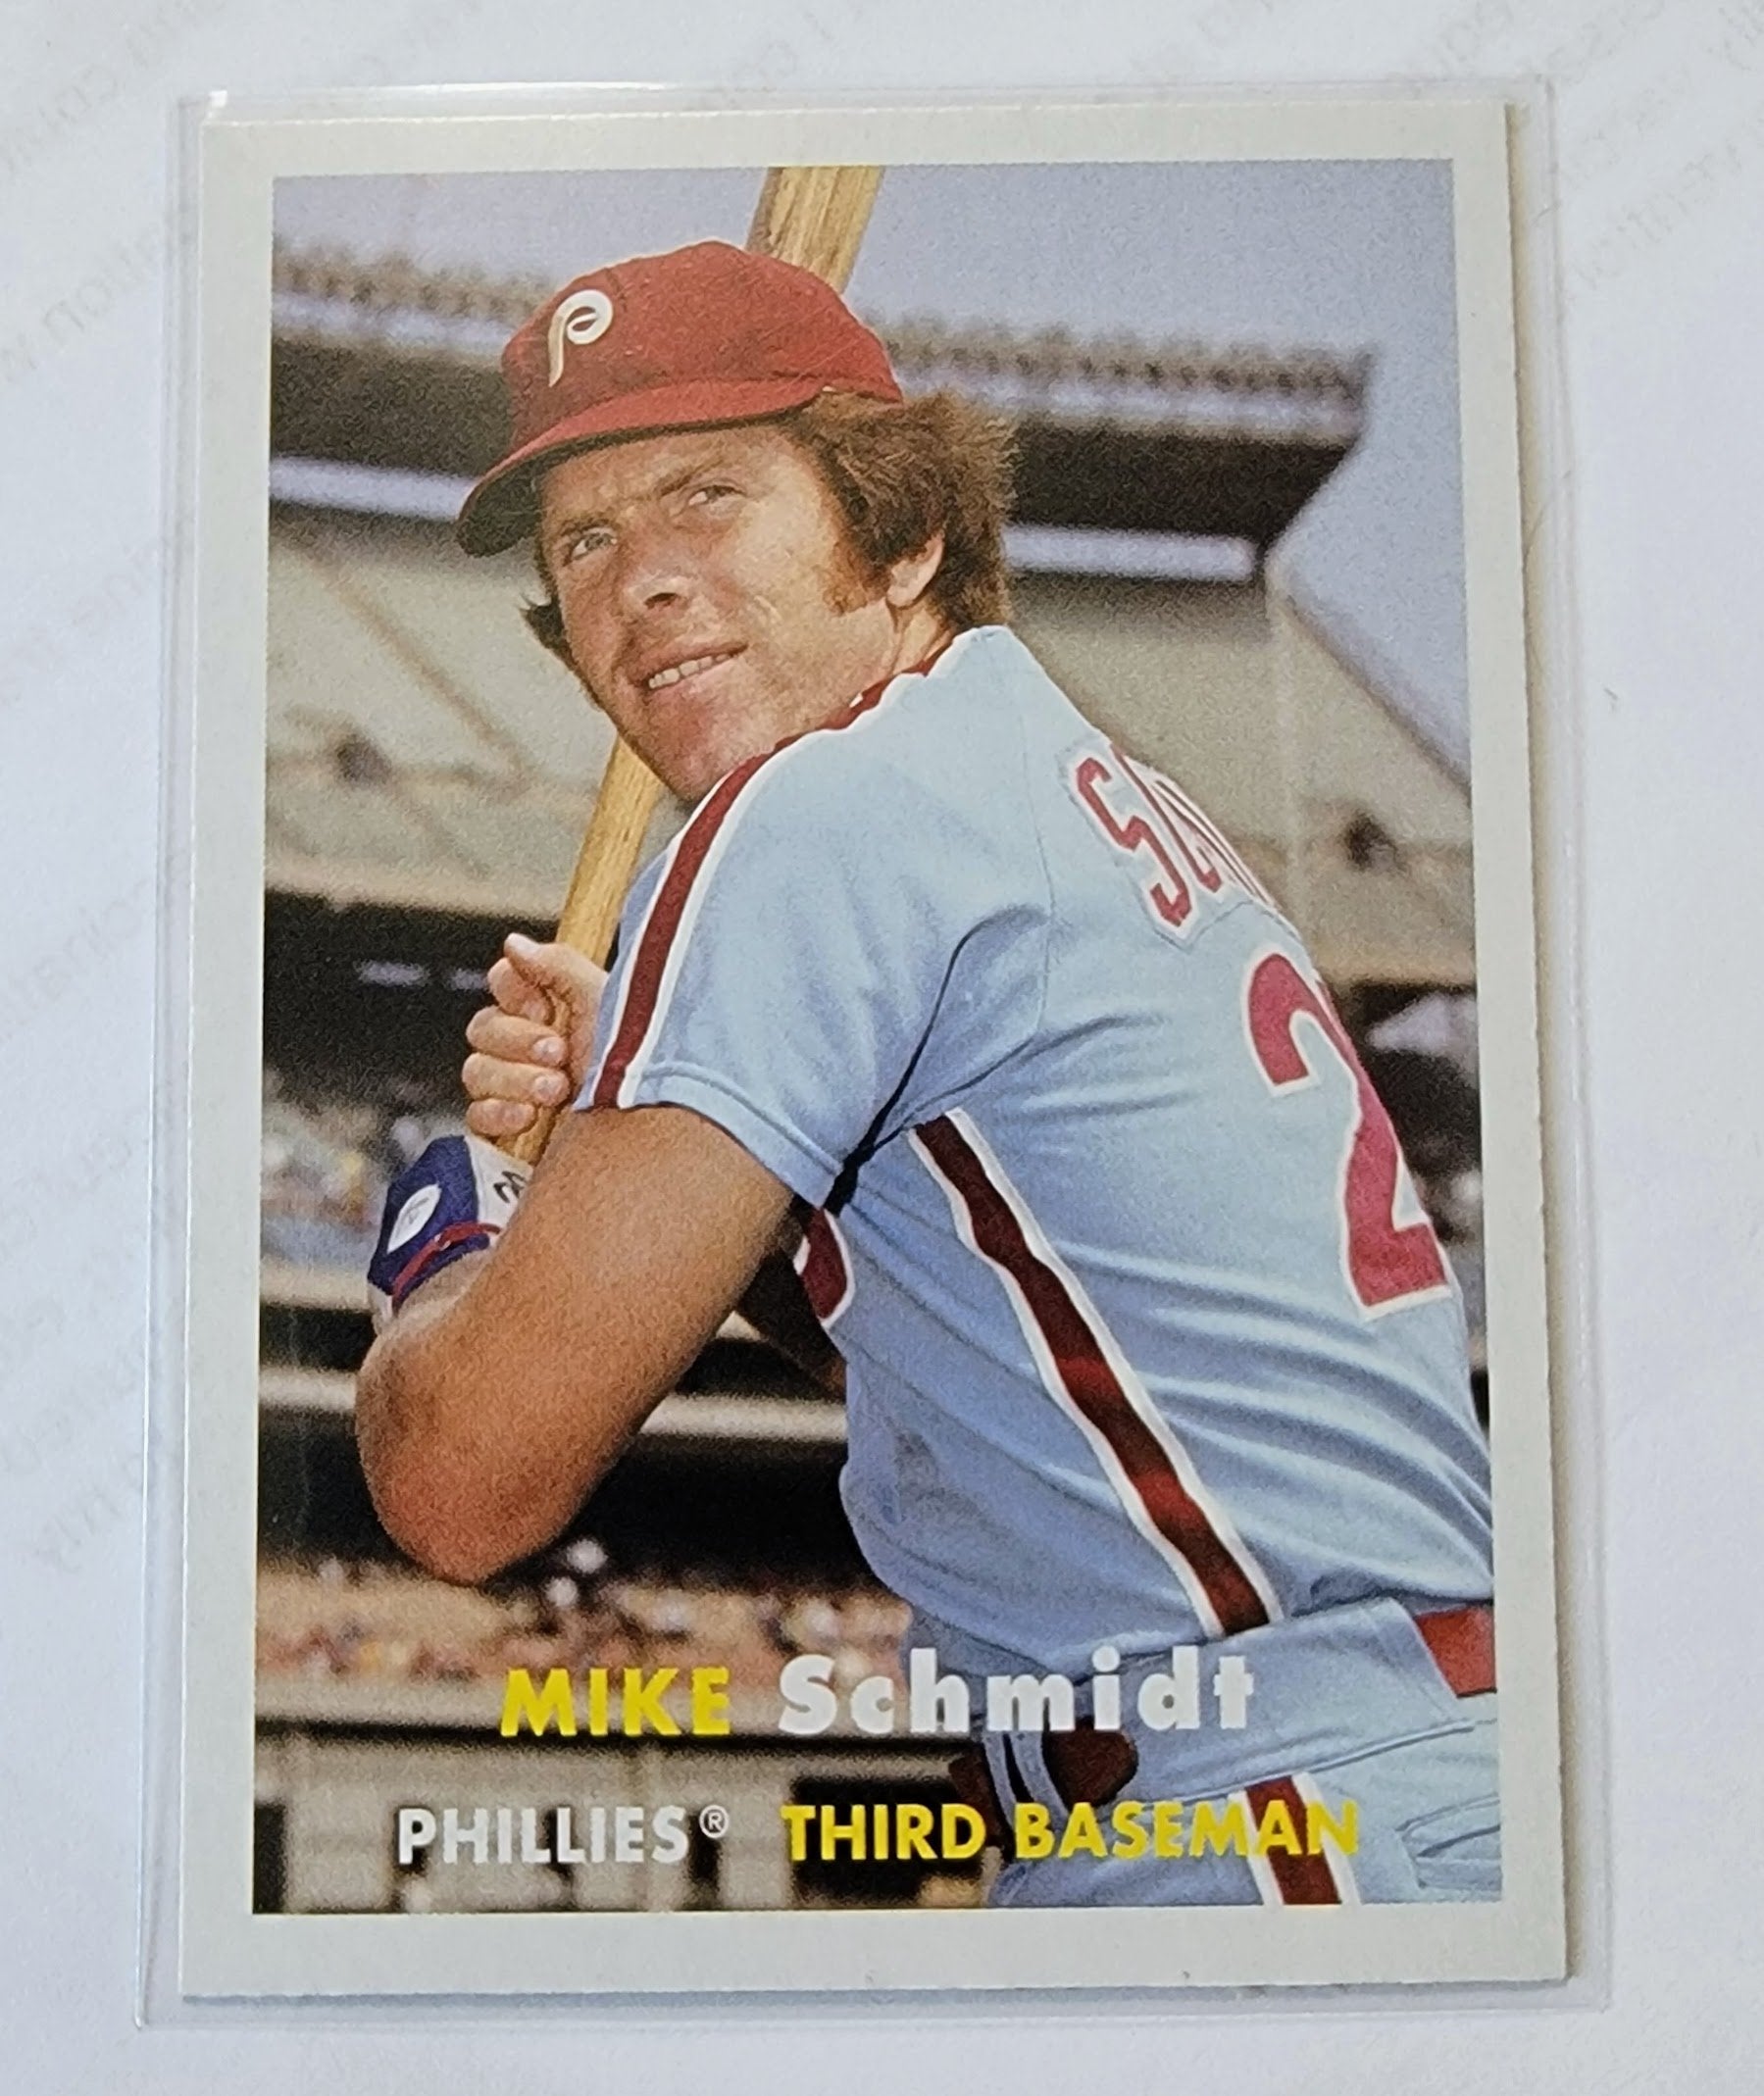 2021 Topps Archives Mike Schmidt 1957 Baseball Trading Card SMCB1 simple Xclusive Collectibles   